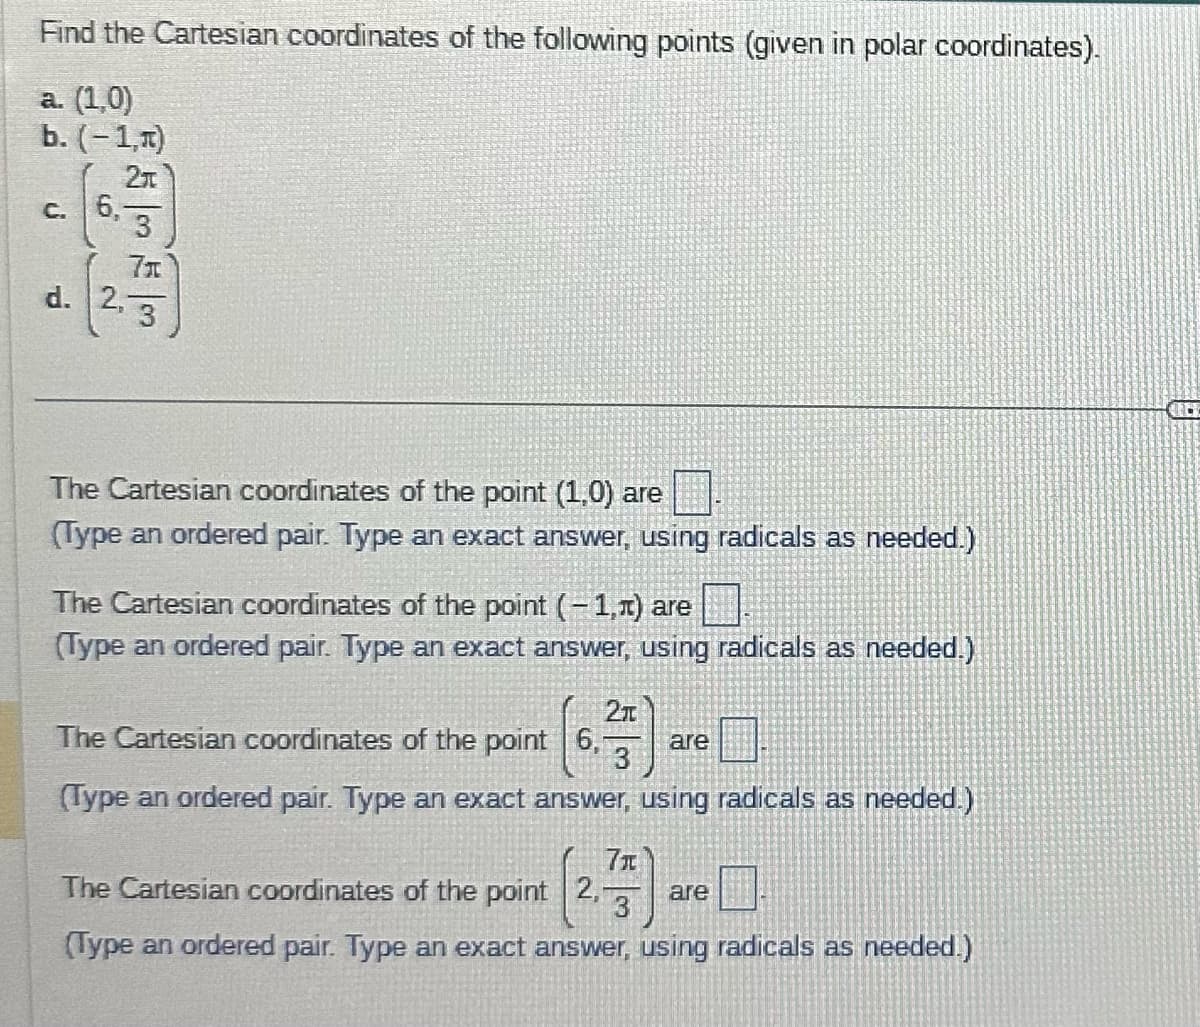 Find the Cartesian coordinates of the following points (given in polar coordinates).
a. (1,0)
b. (-1,A)
c. 6,
5m 5m
3
d. 2,3
The Cartesian coordinates of the point (1,0) are
(Type an ordered pair. Type an exact answer, using radicals as needed.)
The Cartesian coordinates of the point (-1,1) are
(Type an ordered pair. Type an exact answer, using radicals as needed.)
21
The Cartesian coordinates of the point 6, are
3
(Type an ordered pair. Type an exact answer, using radicals as needed.)
7x
The Cartesian coordinates of the point 2, are
(Type an ordered pair. Type an exact answer, using radicals as needed.)